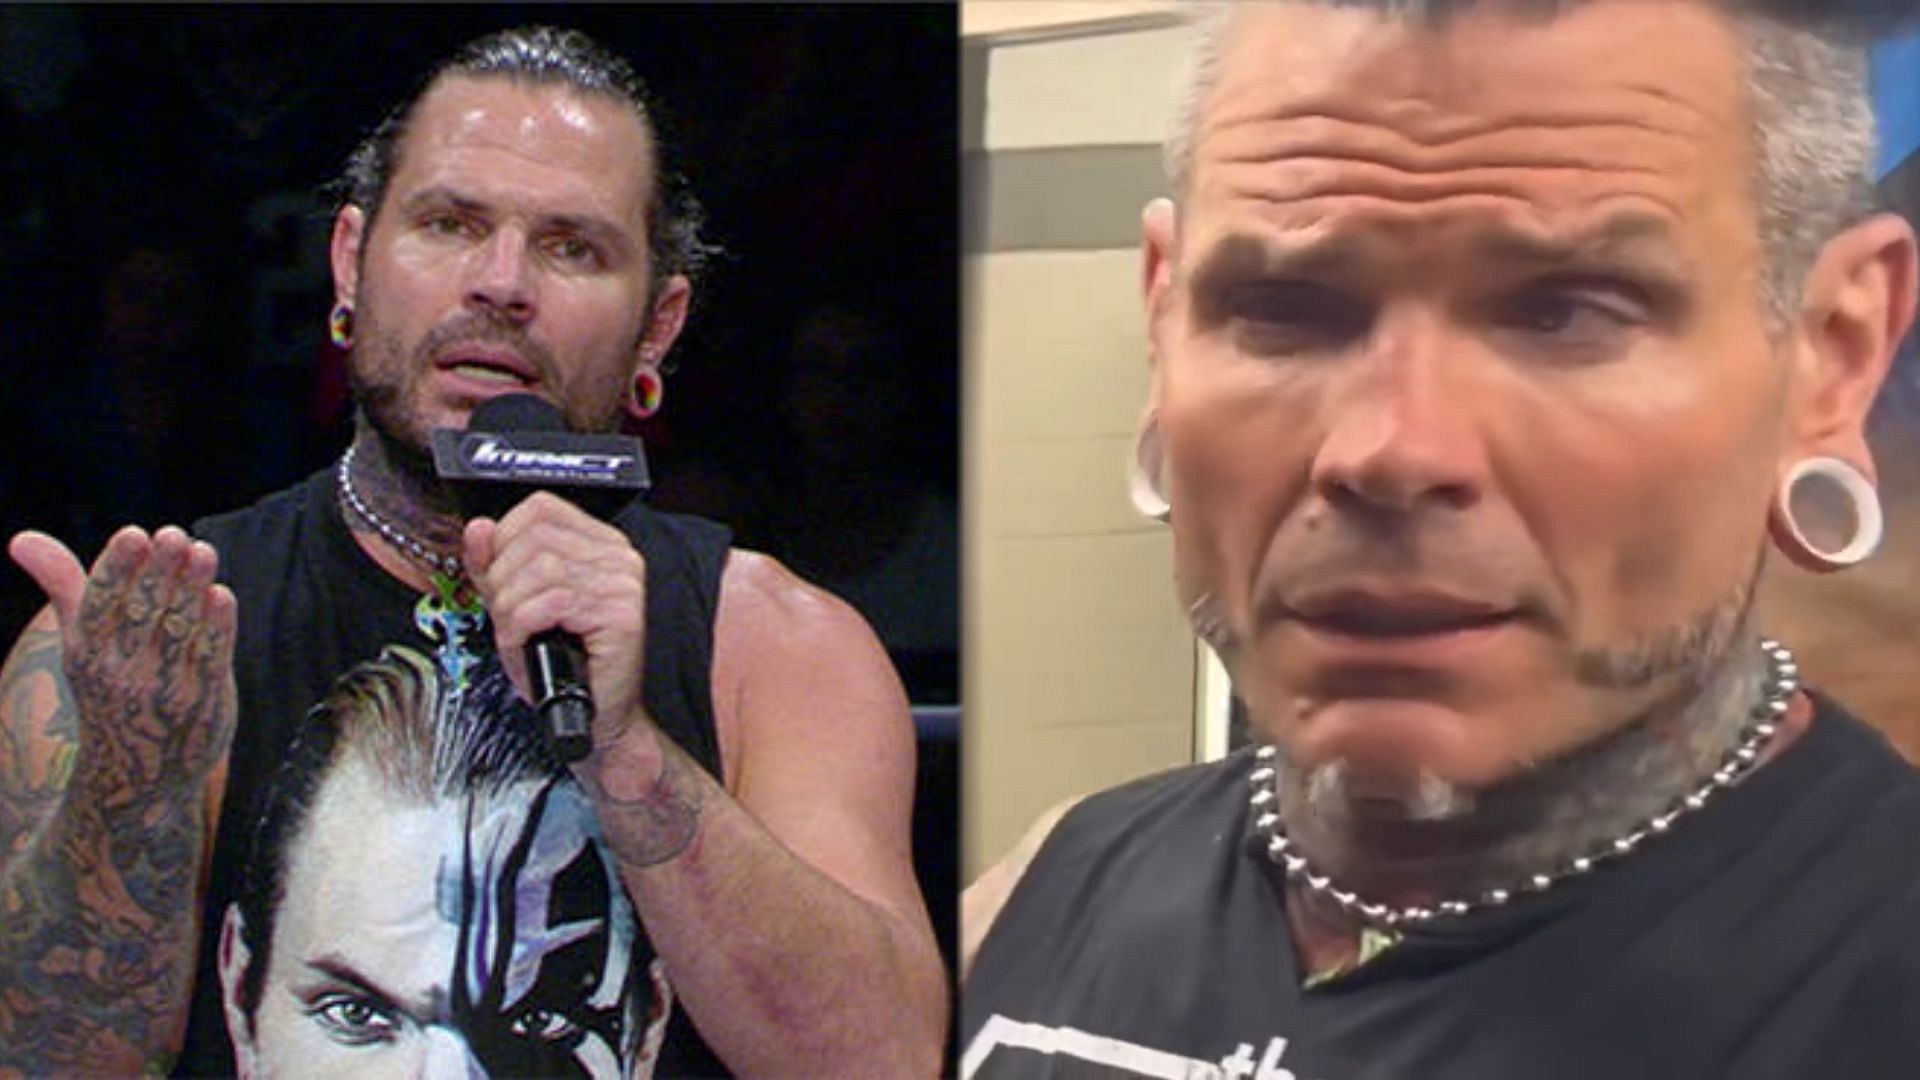 Will Jeff Hardy continue to work with this AEW star after this incident?